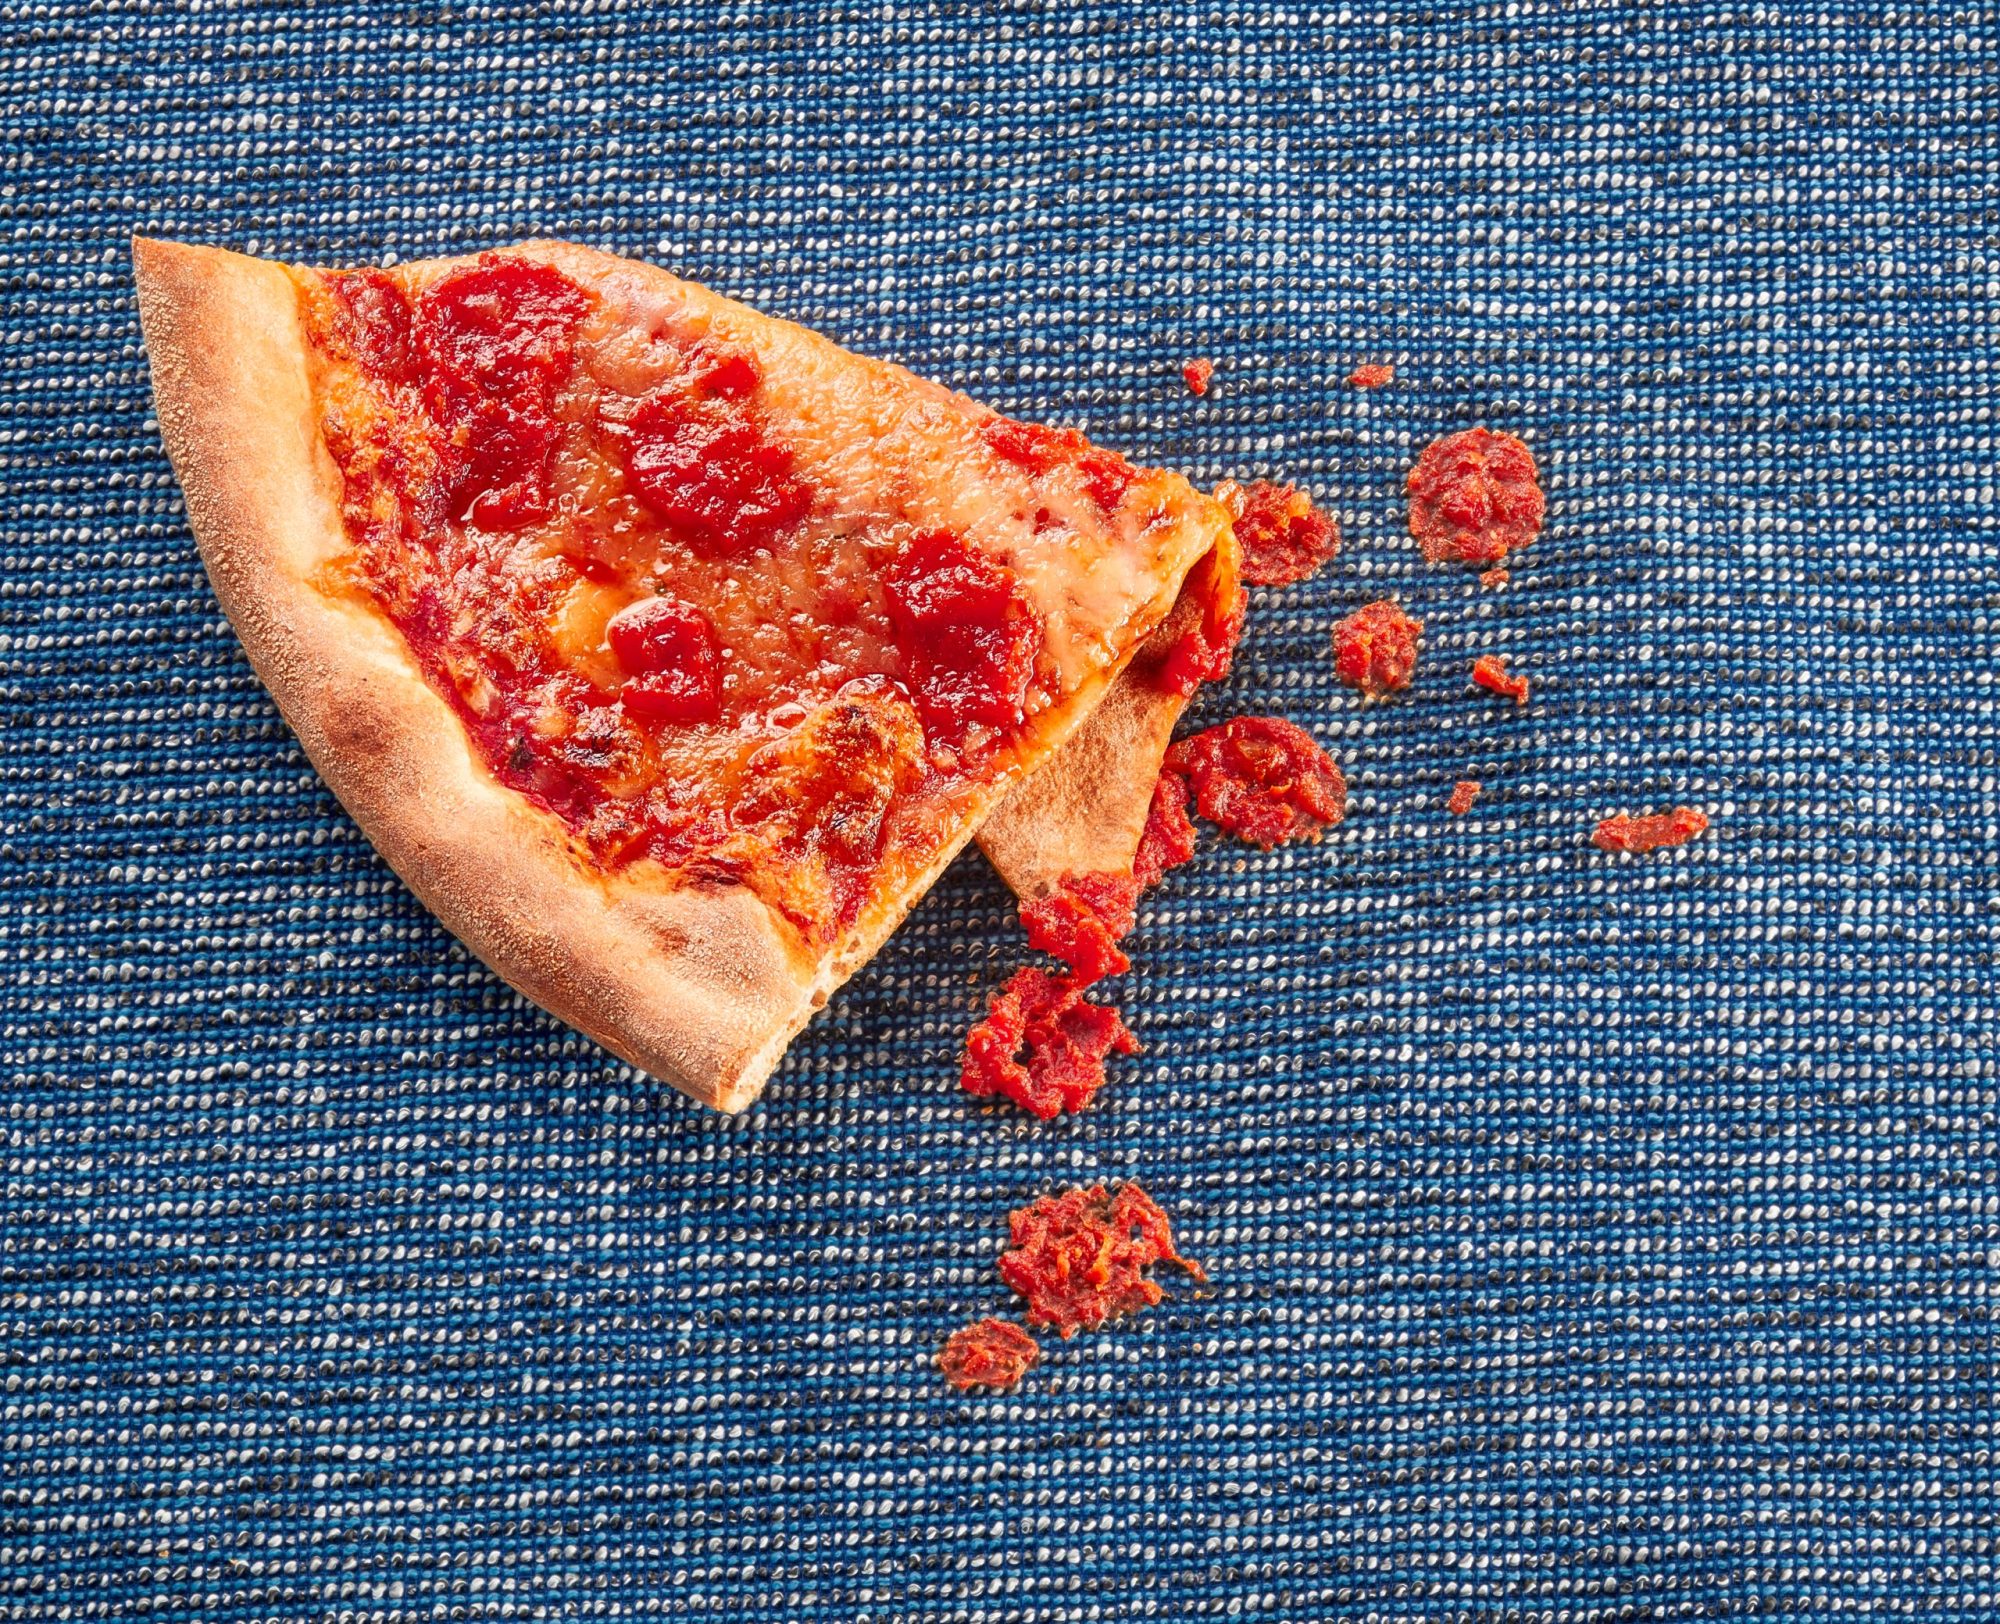 slice of pizza that fell onto the couch